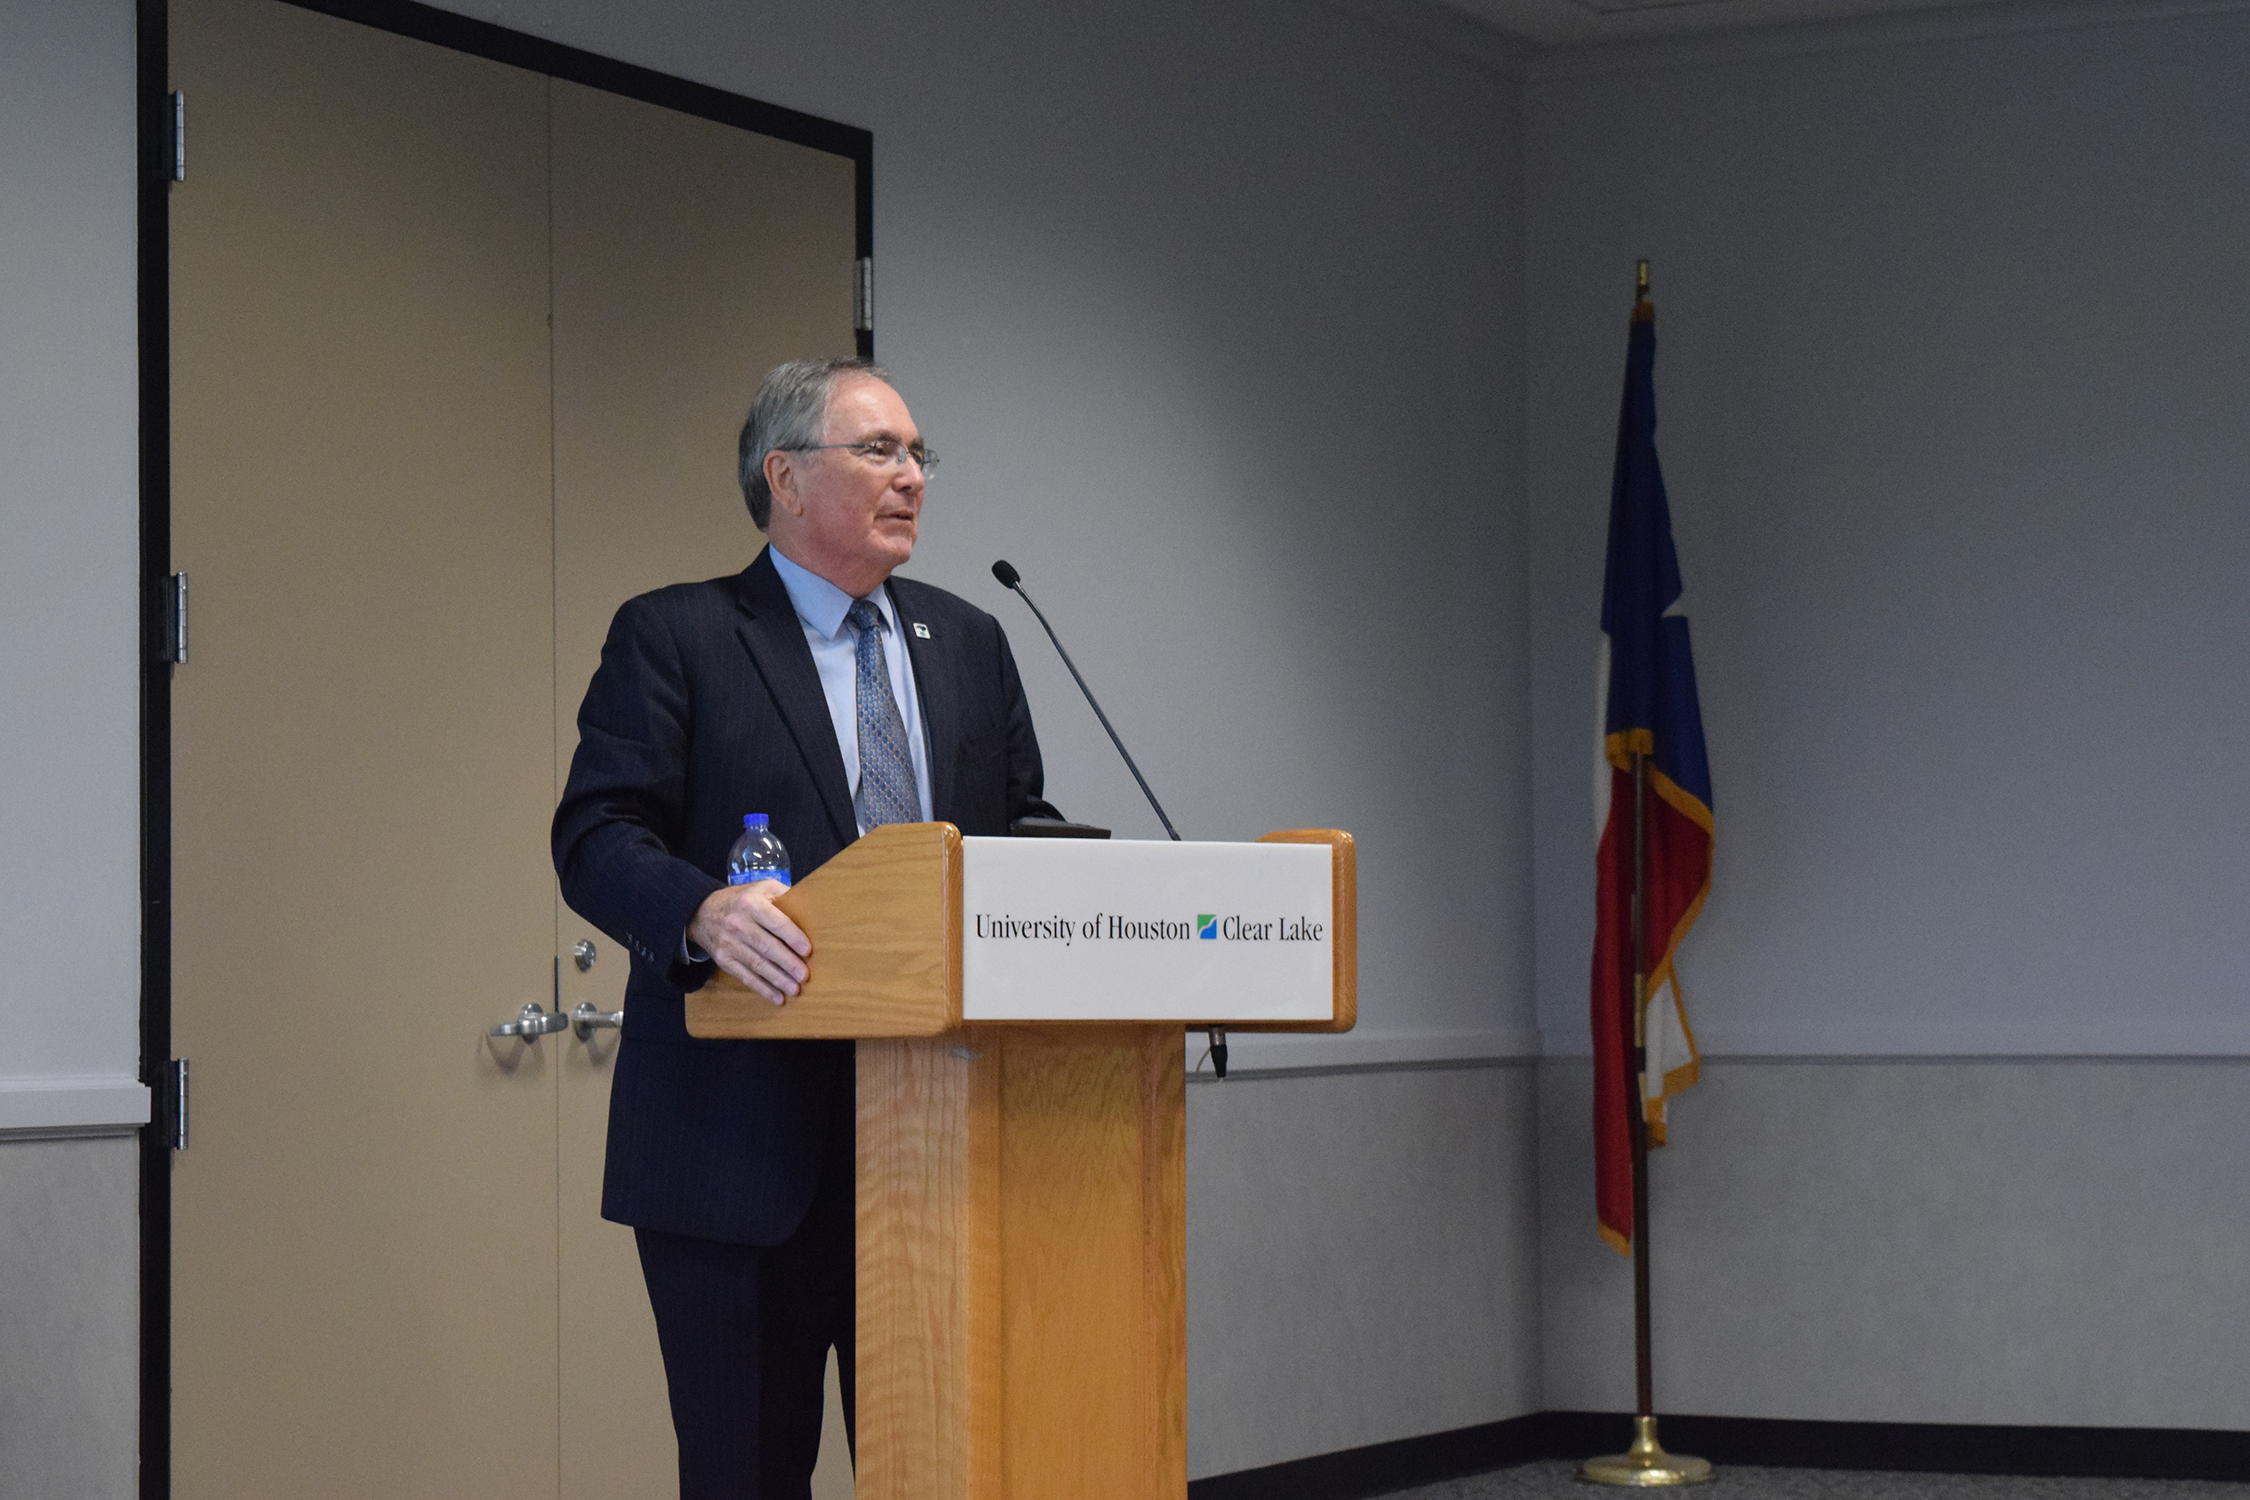 Photo: President William Staples speaks at a podium about the university budget gap at a meeting Feb. 9. Photo by The Signal reporter Krista Kamp.